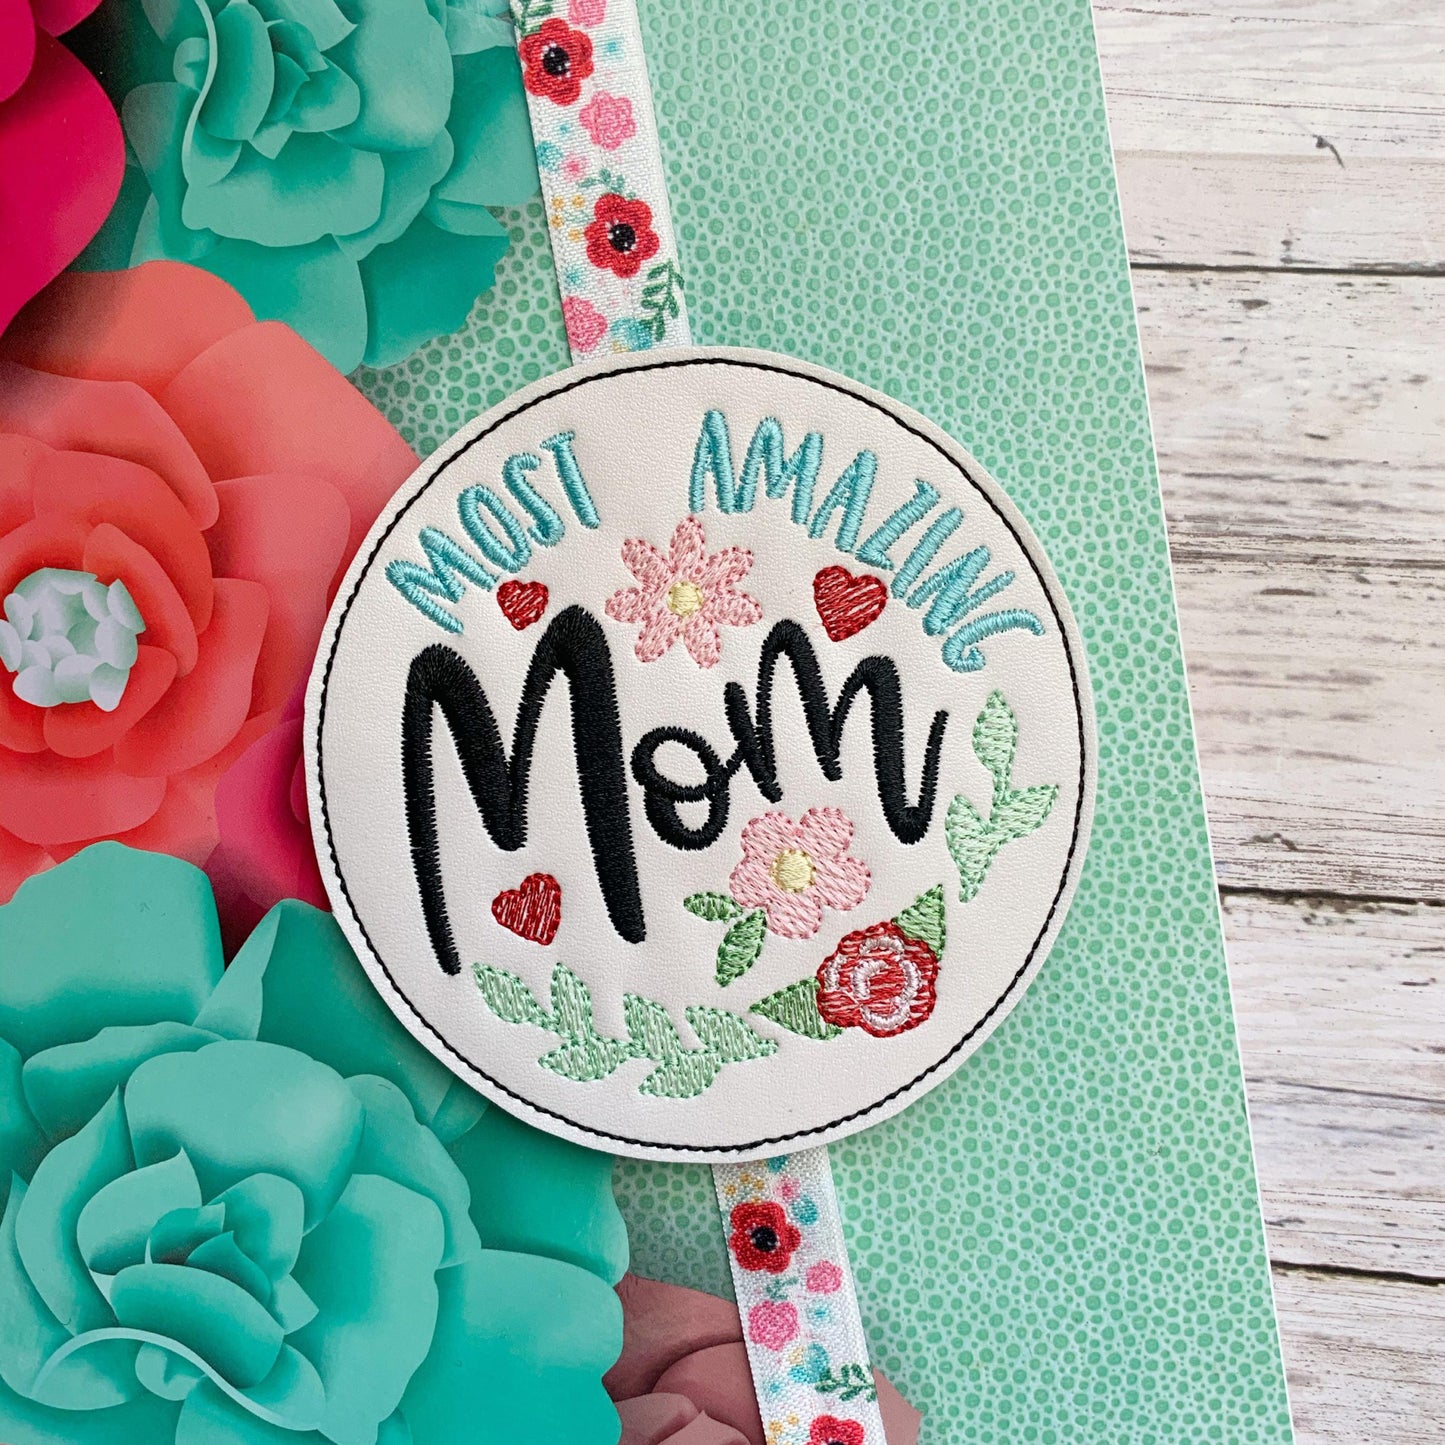 Most Amazing Mom Book Band - Embroidery Design, Digital File